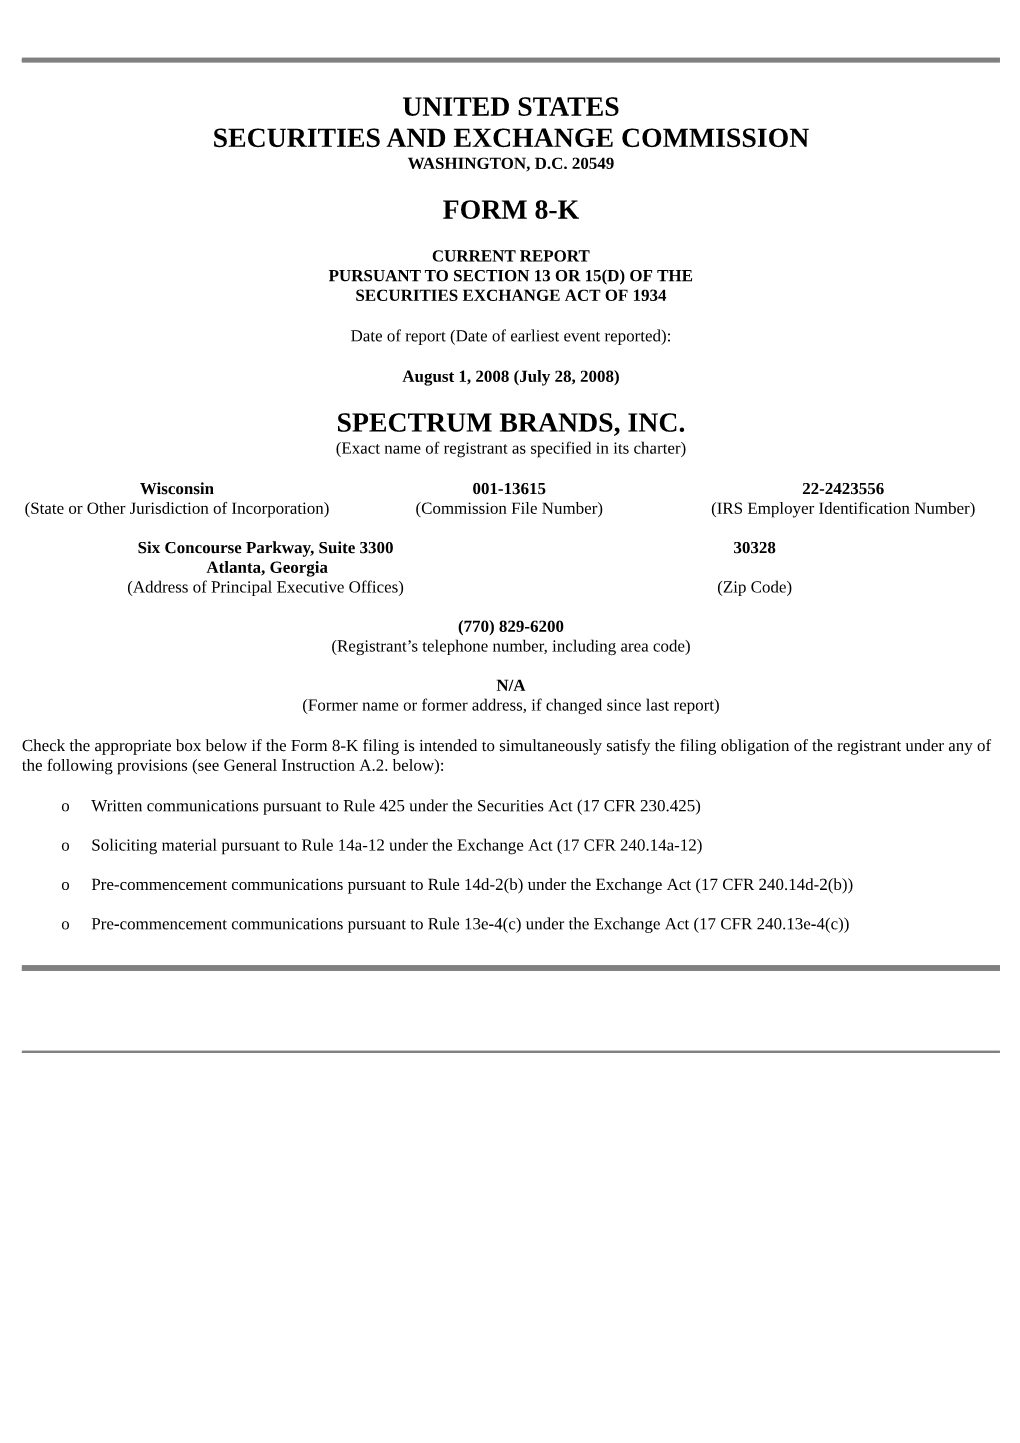 United States Securities and Exchange Commission Form 8-K Spectrum Brands, Inc